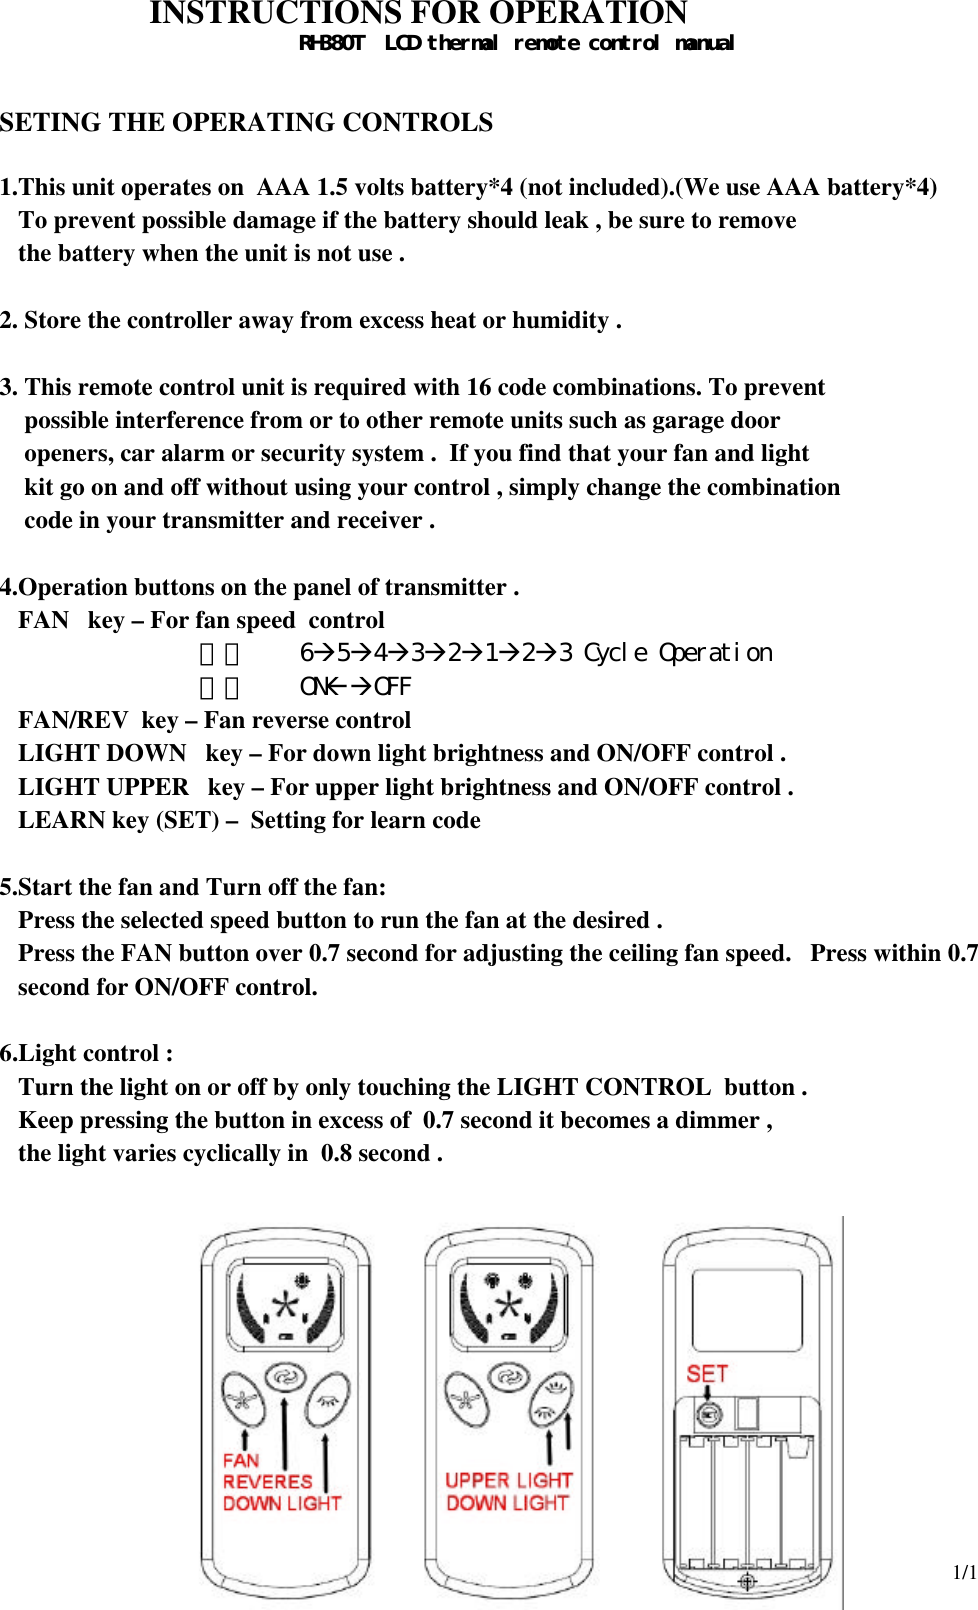 1/1  INSTRUCTIONS FOR OPERATION RH380T  LCD thermal remote control manual    SETING THE OPERATING CONTROLS  1.This unit operates on  AAA 1.5 volts battery*4 (not included).(We use AAA battery*4)    To prevent possible damage if the battery should leak , be sure to remove    the battery when the unit is not use .  2. Store the controller away from excess heat or humidity .  3. This remote control unit is required with 16 code combinations. To prevent  possible interference from or to other remote units such as garage door  openers, car alarm or security system .  If you find that your fan and light   kit go on and off without using your control , simply change the combination  code in your transmitter and receiver .  4.Operation buttons on the panel of transmitter . FAN   key – For fan speed  control 甲、 6à5à4à3à2à1à2à3 Cycle Operation  乙、 ONßàOFF FAN/REV  key – Fan reverse control  LIGHT DOWN   key – For down light brightness and ON/OFF control . LIGHT UPPER   key – For upper light brightness and ON/OFF control . LEARN key (SET) –  Setting for learn code  5.Start the fan and Turn off the fan: Press the selected speed button to run the fan at the desired . Press the FAN button over 0.7 second for adjusting the ceiling fan speed.   Press within 0.7 second for ON/OFF control.  6.Light control : Turn the light on or off by only touching the LIGHT CONTROL  button . Keep pressing the button in excess of  0.7 second it becomes a dimmer , the light varies cyclically in  0.8 second .              